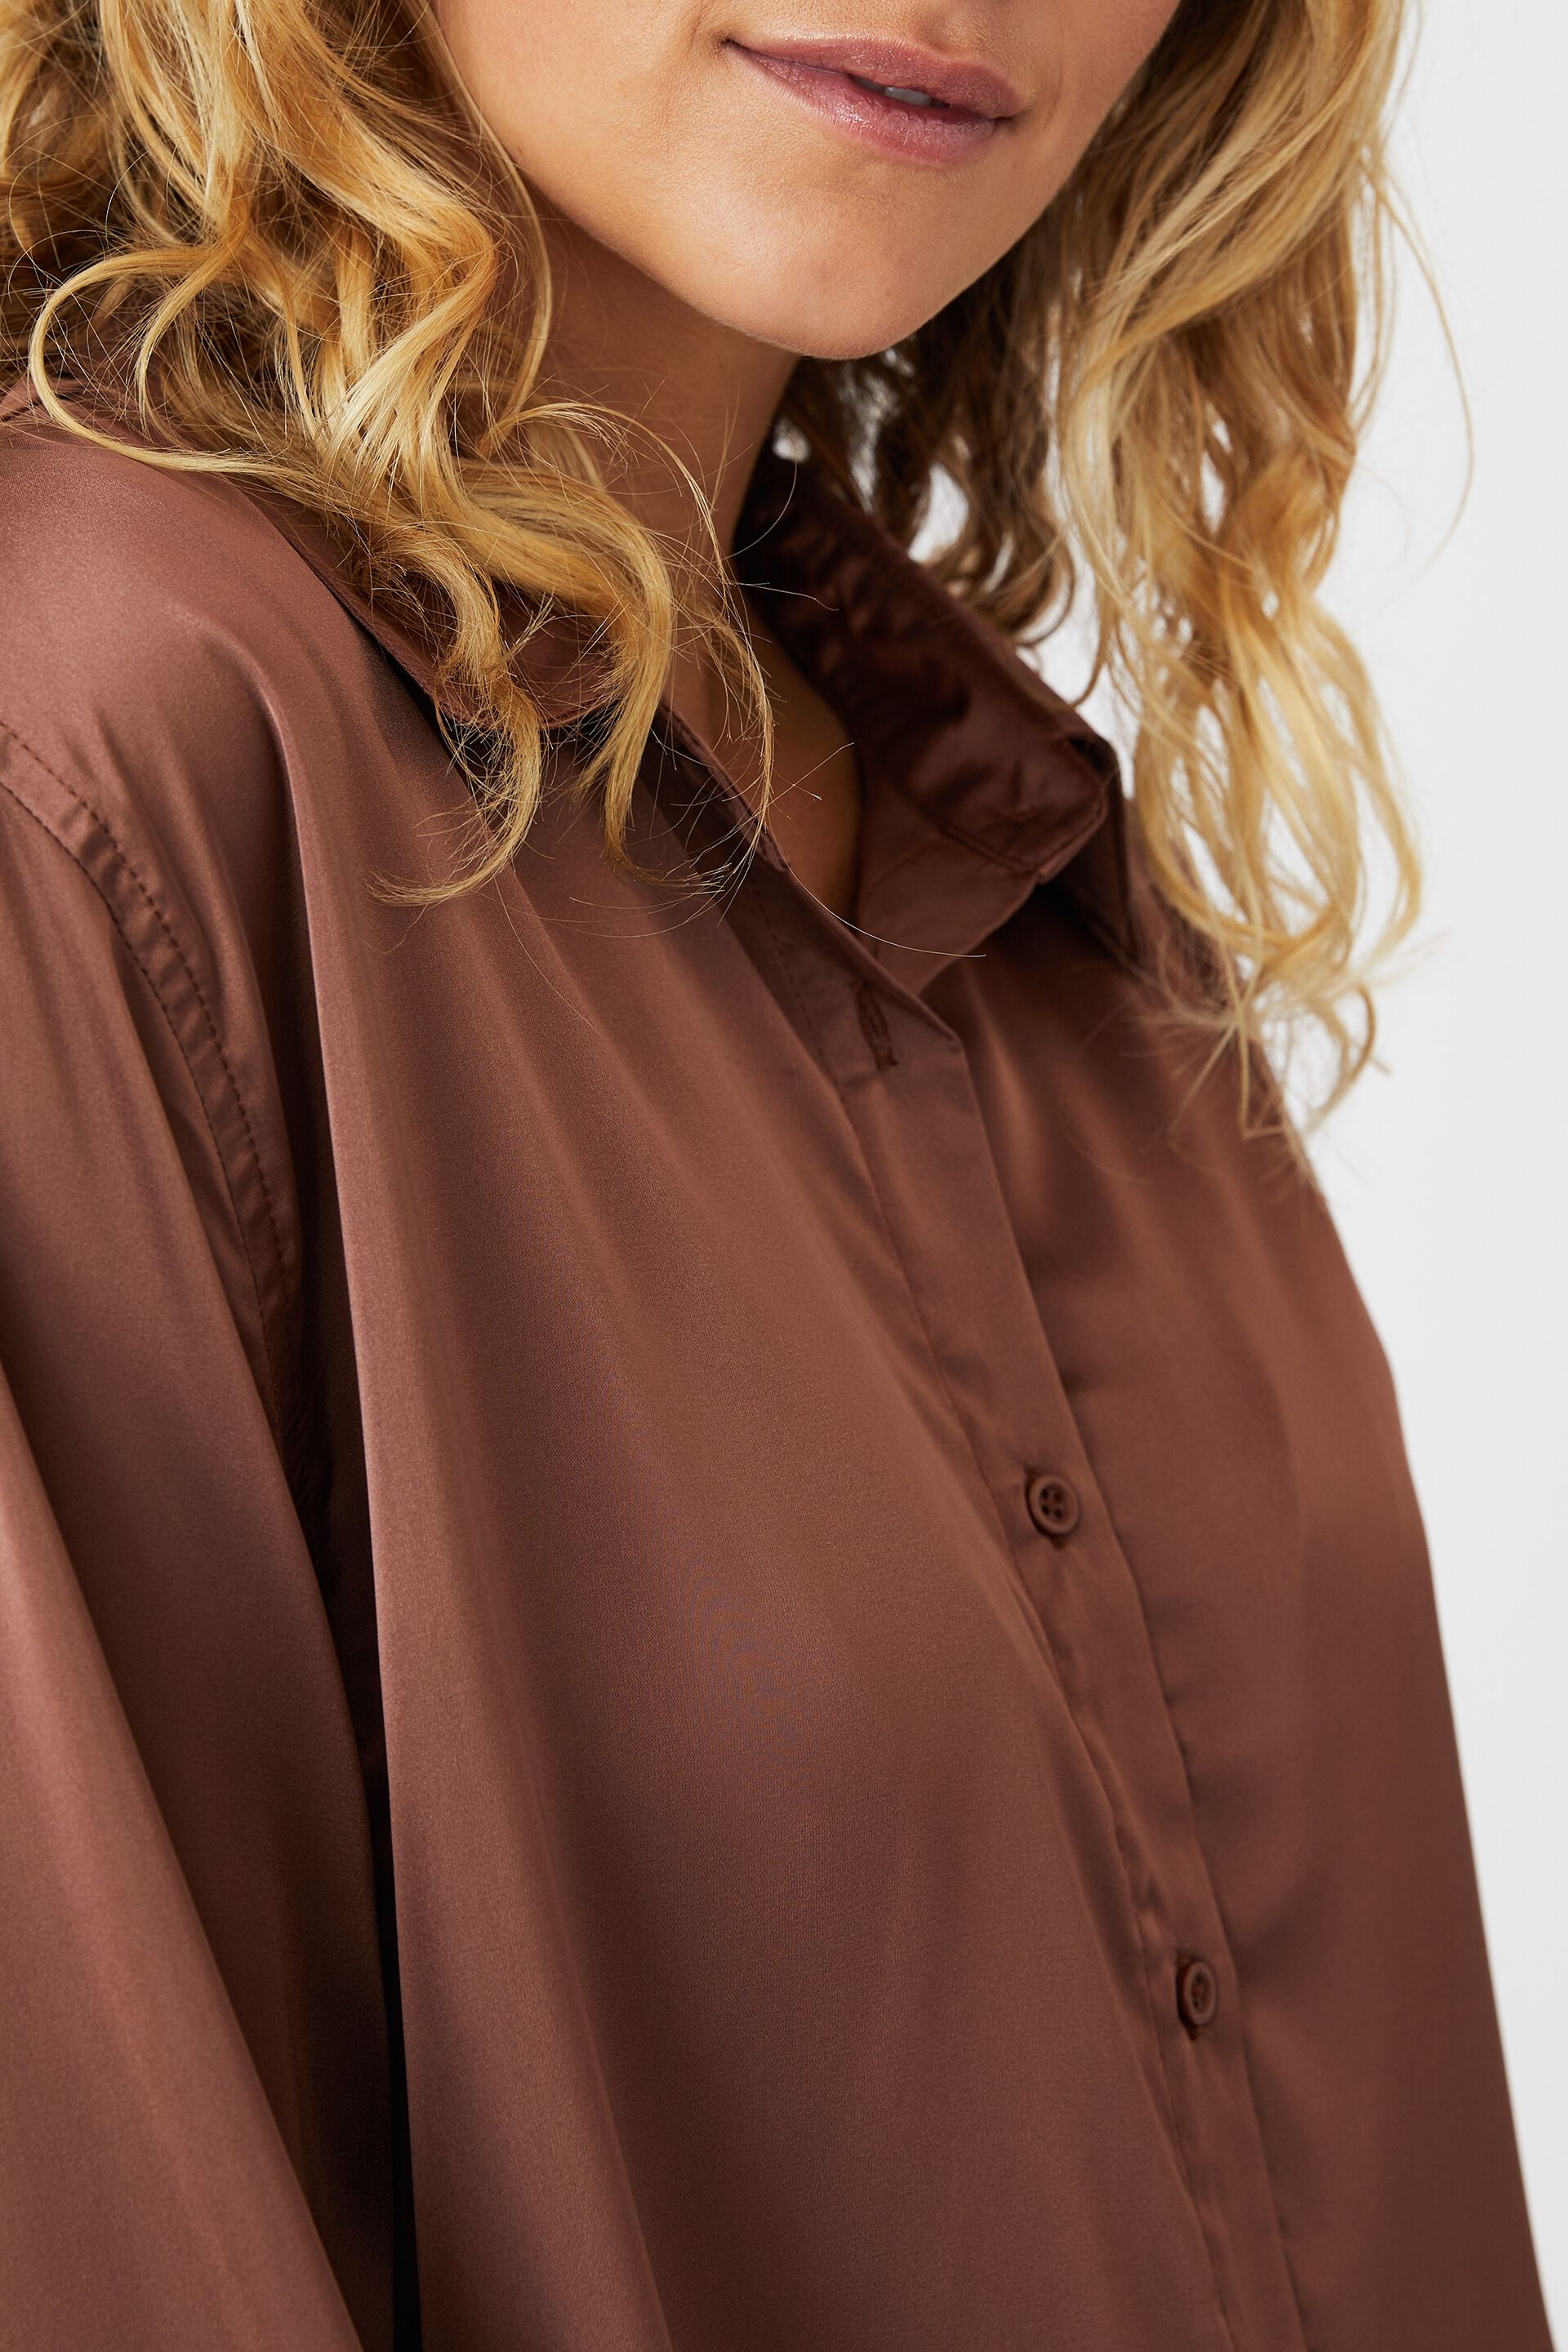 Gifts Gifts For Her | Long Sleeve Satin Sleep Shirt - PF20519